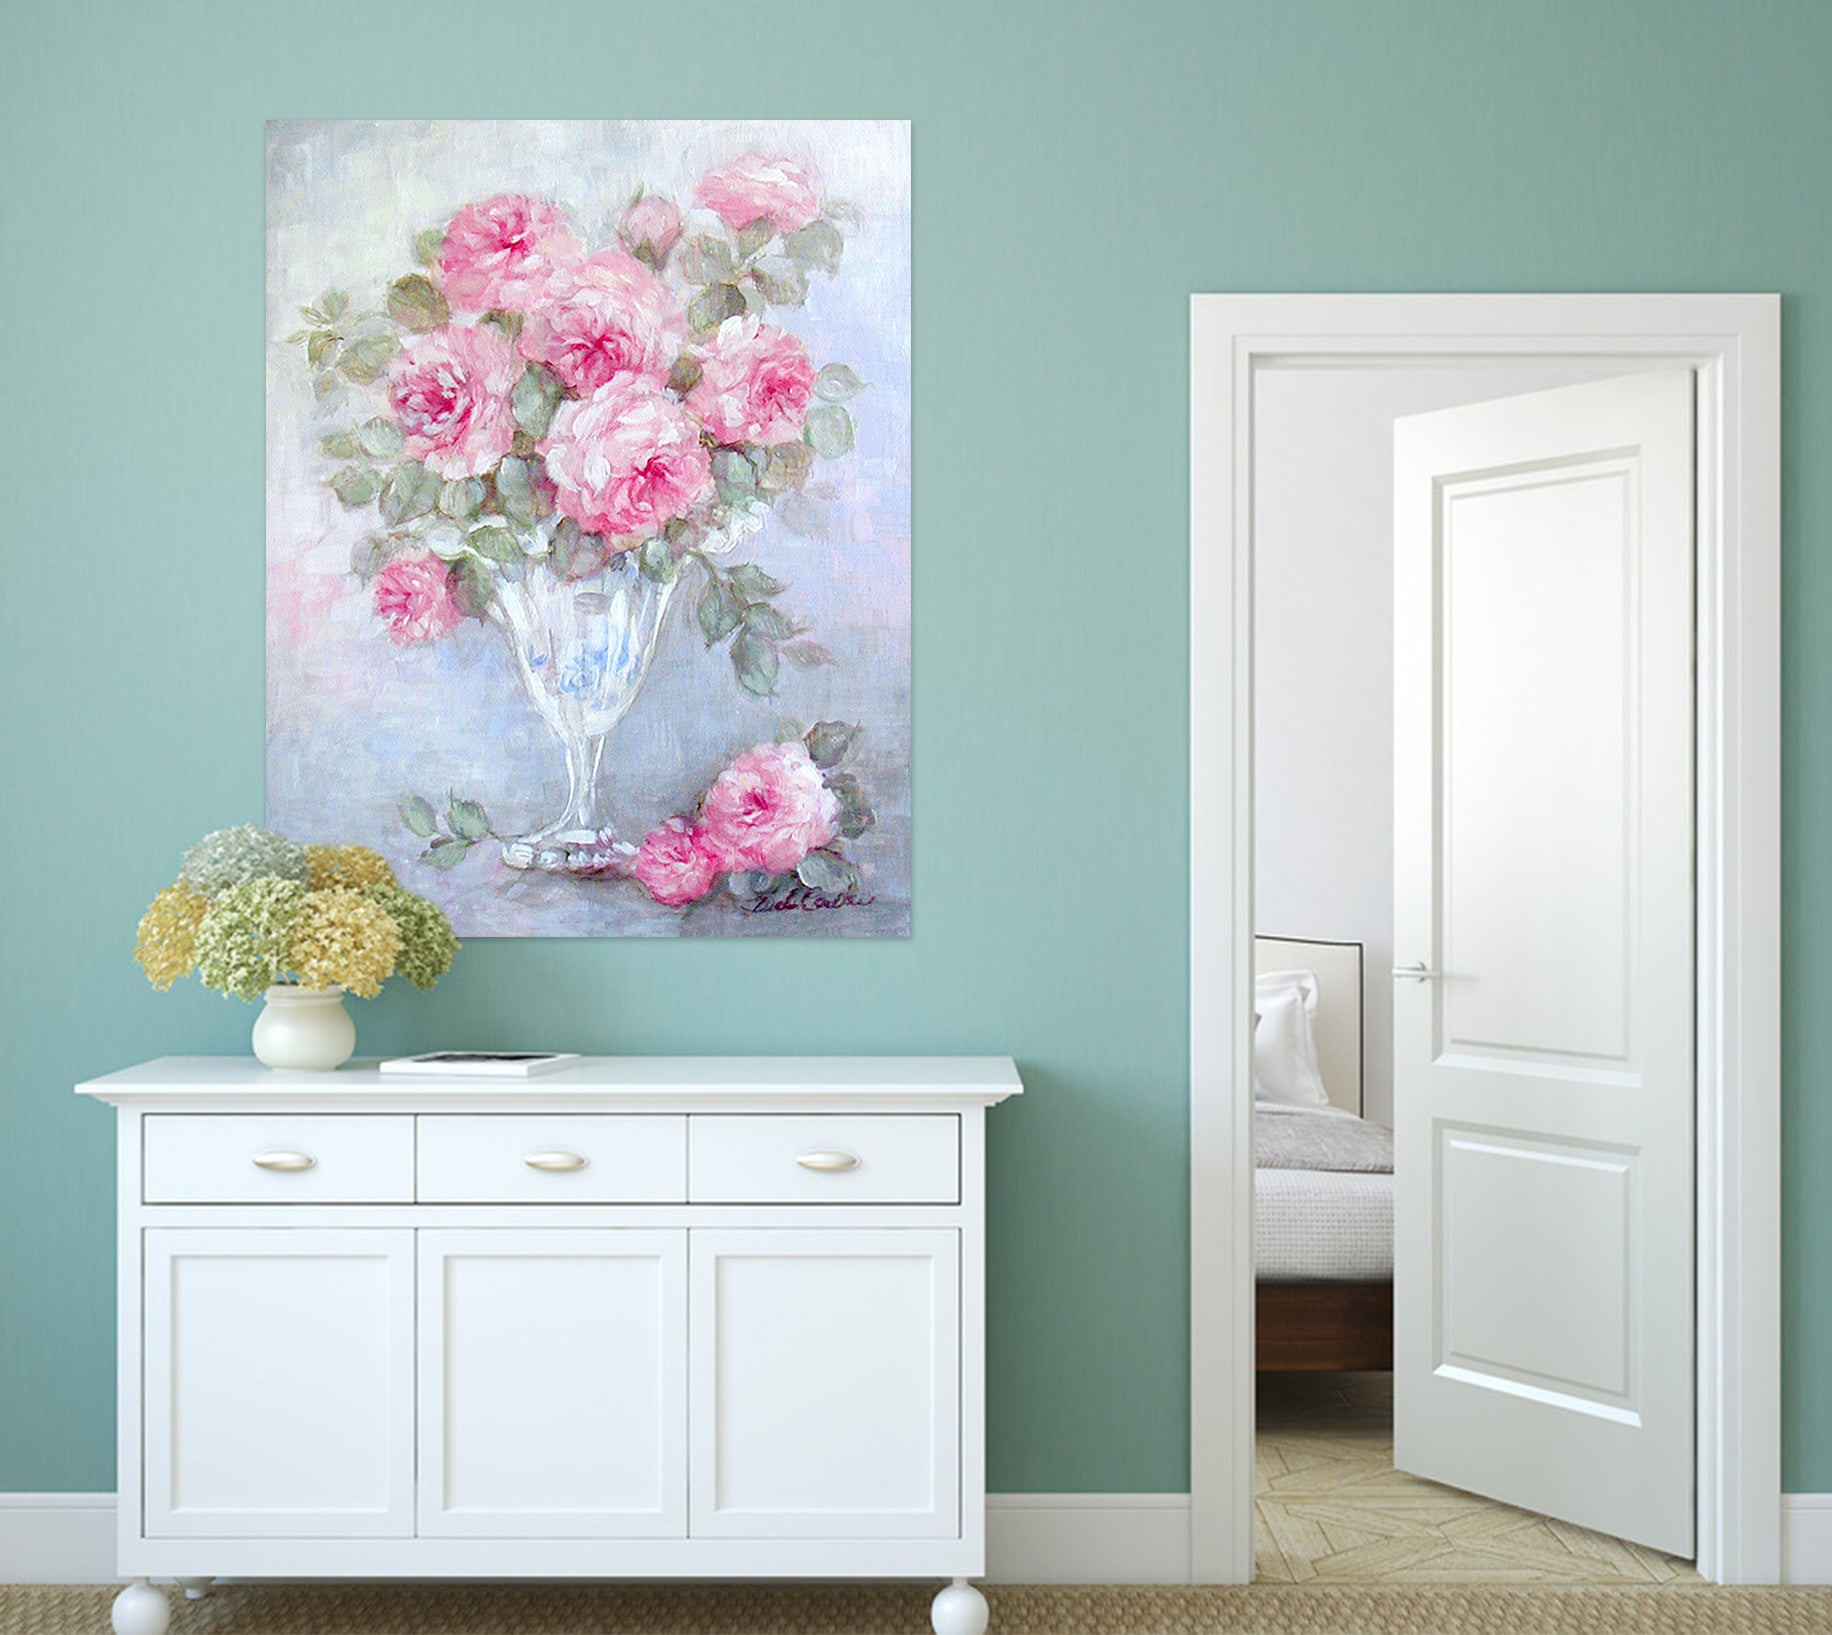 3D Pink Vase 0125 Debi Coules Wall Sticker